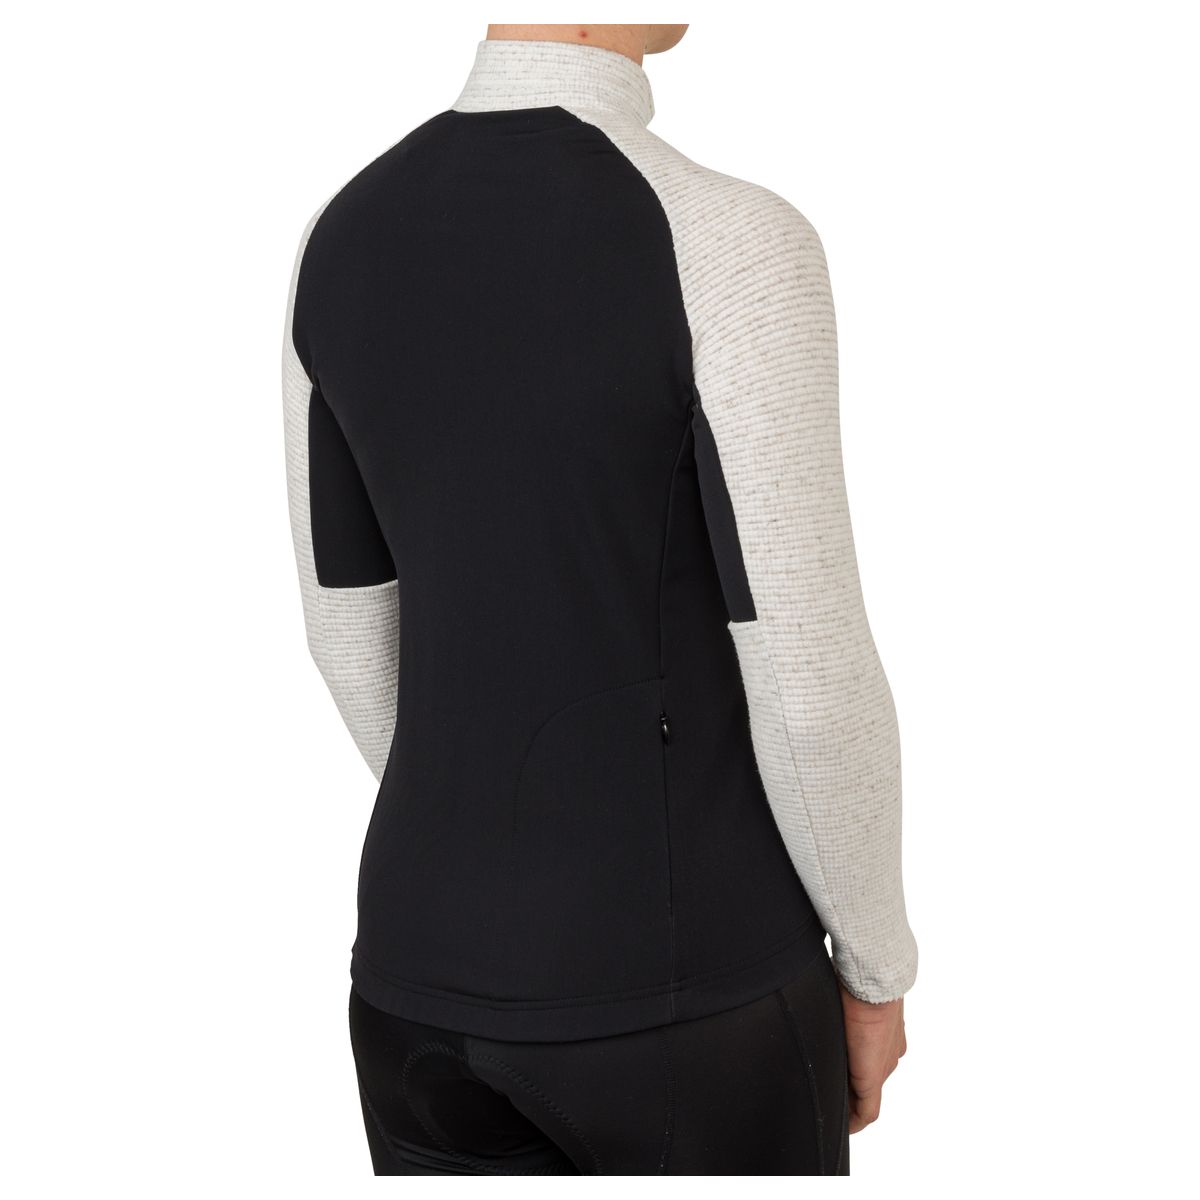 Mid Layer Jersey LS SIX6 Women fit example